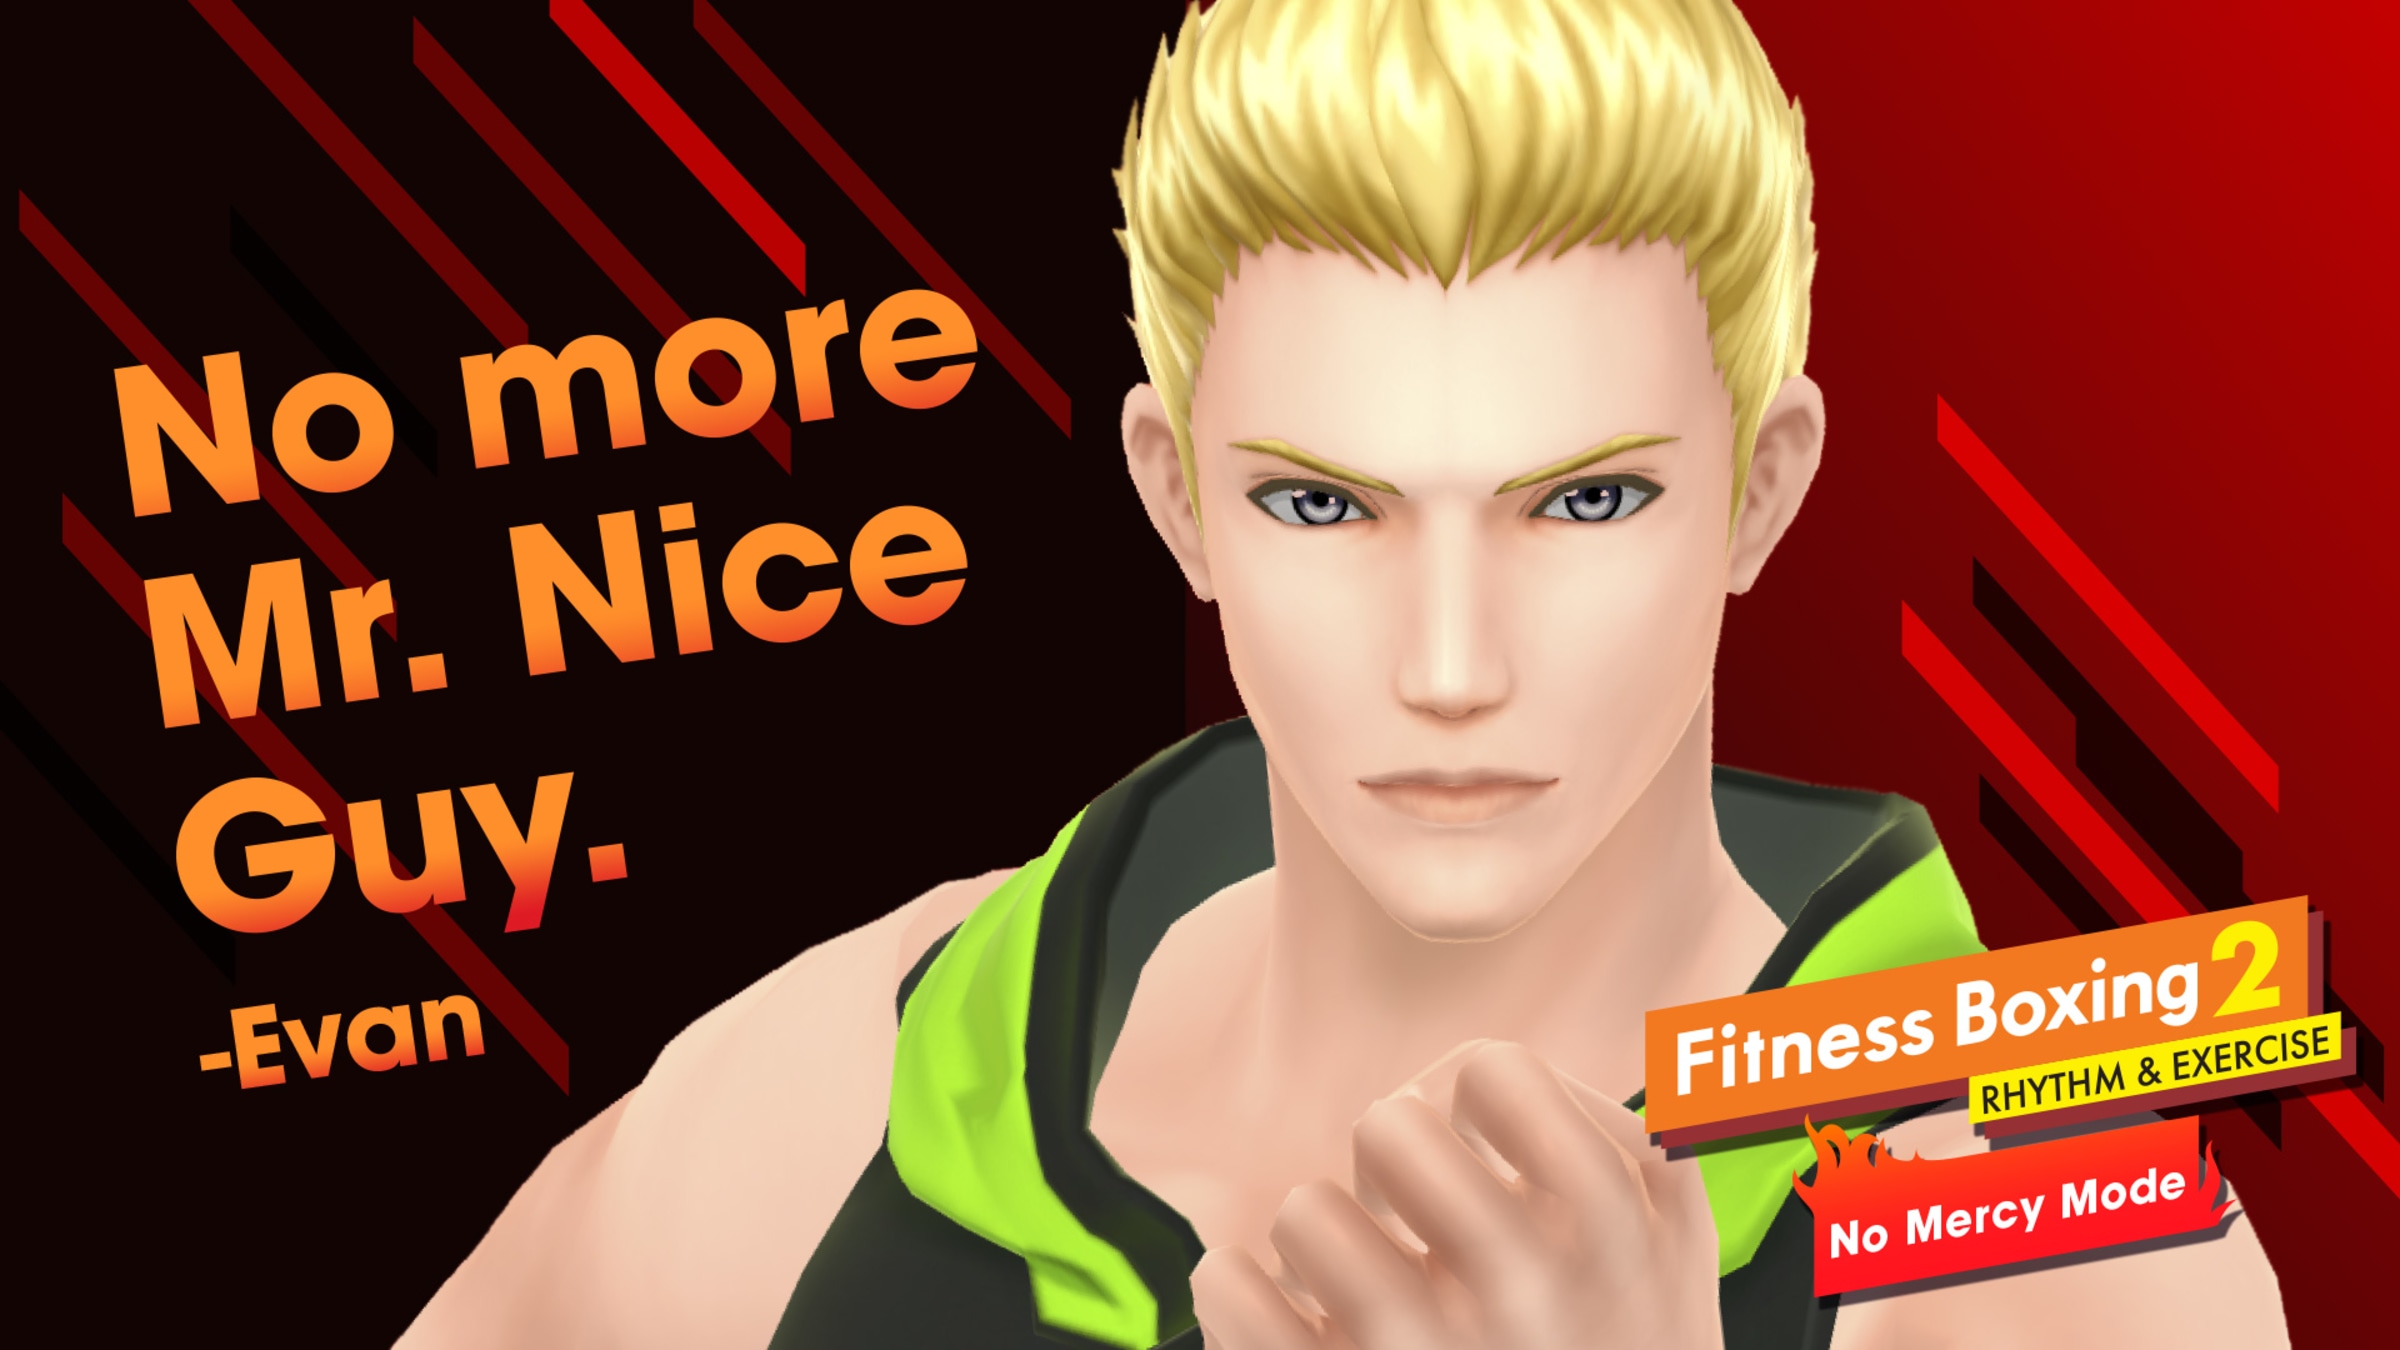 Fitness Boxing 2: Exercise - Mercy Rhythm Switch & for Official Nintendo No Nintendo intensity: Site Evan